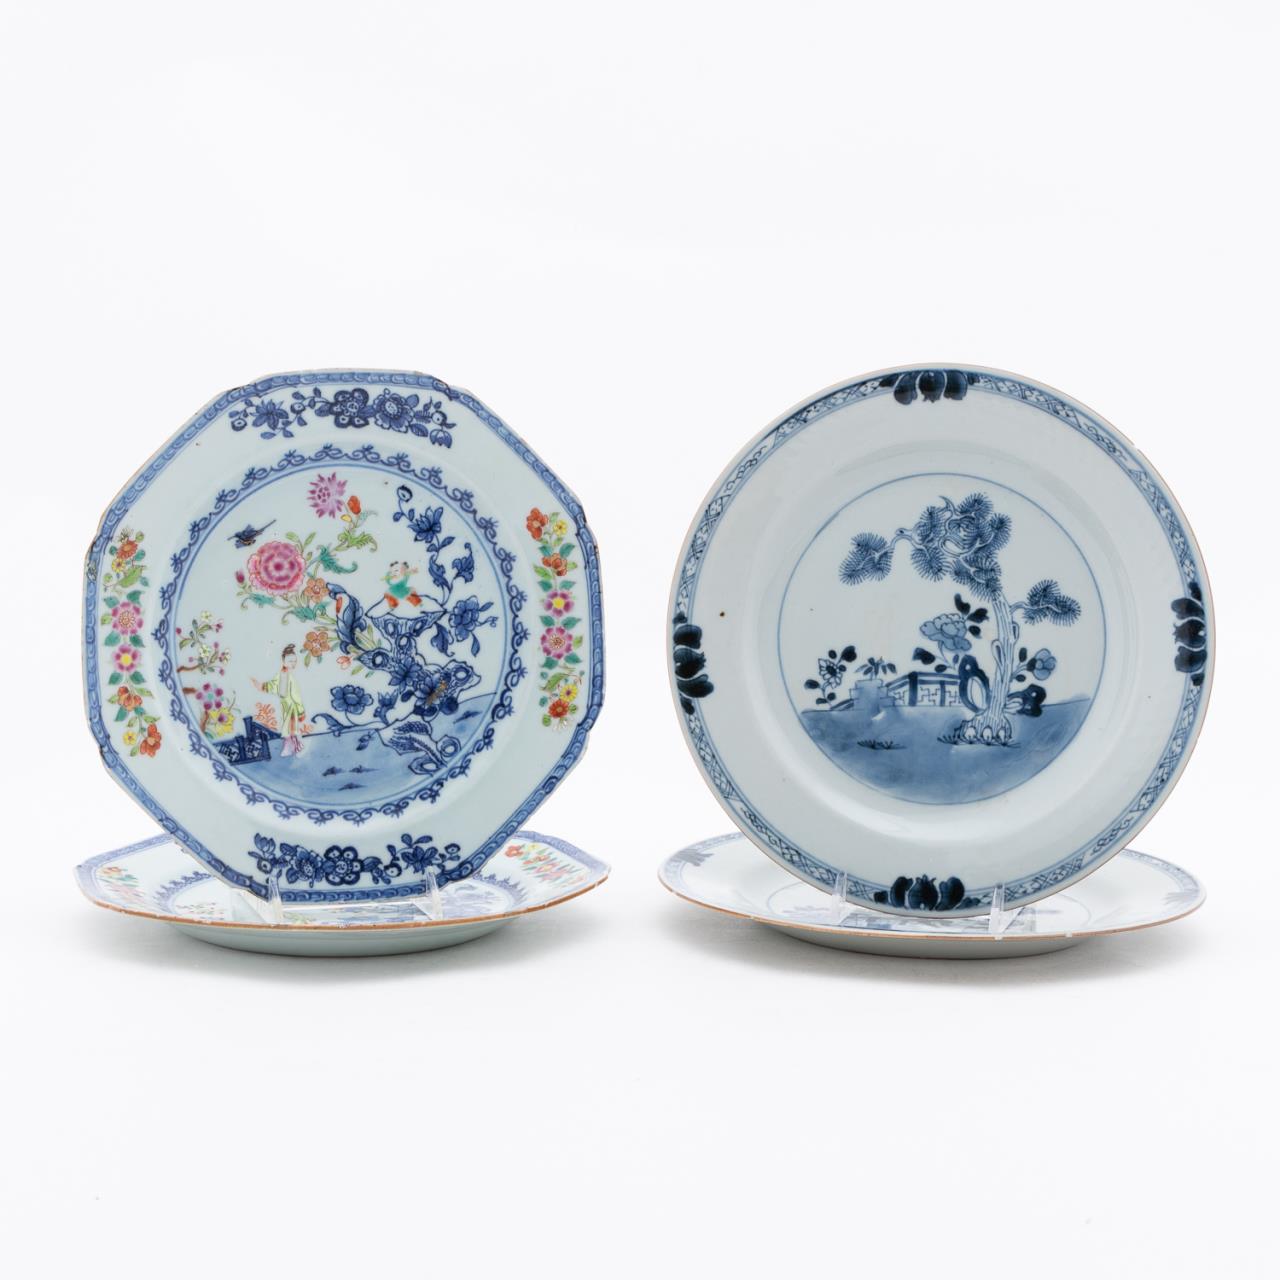 4 PC CHINESE EXPORT PORCELAIN PLATES,